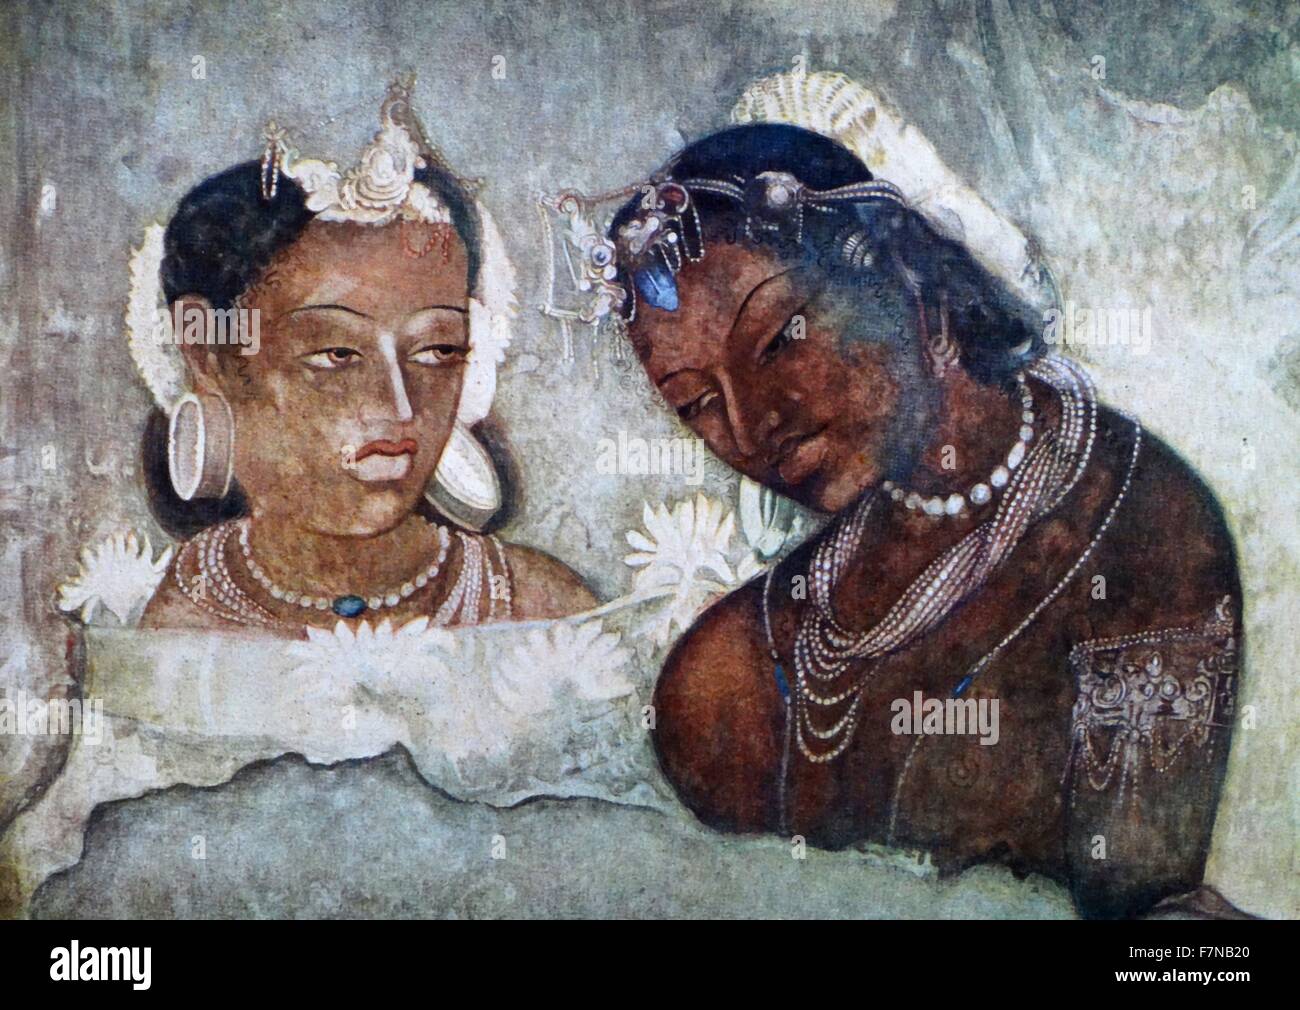 scene in a palace; Fresco from the Ajanta caves in Aurangabad district of Maharashtra, India are about 30 rock-cut Buddhist cave monuments which date from the 2nd century BCE to about 480 or 650 CE. Stock Photo